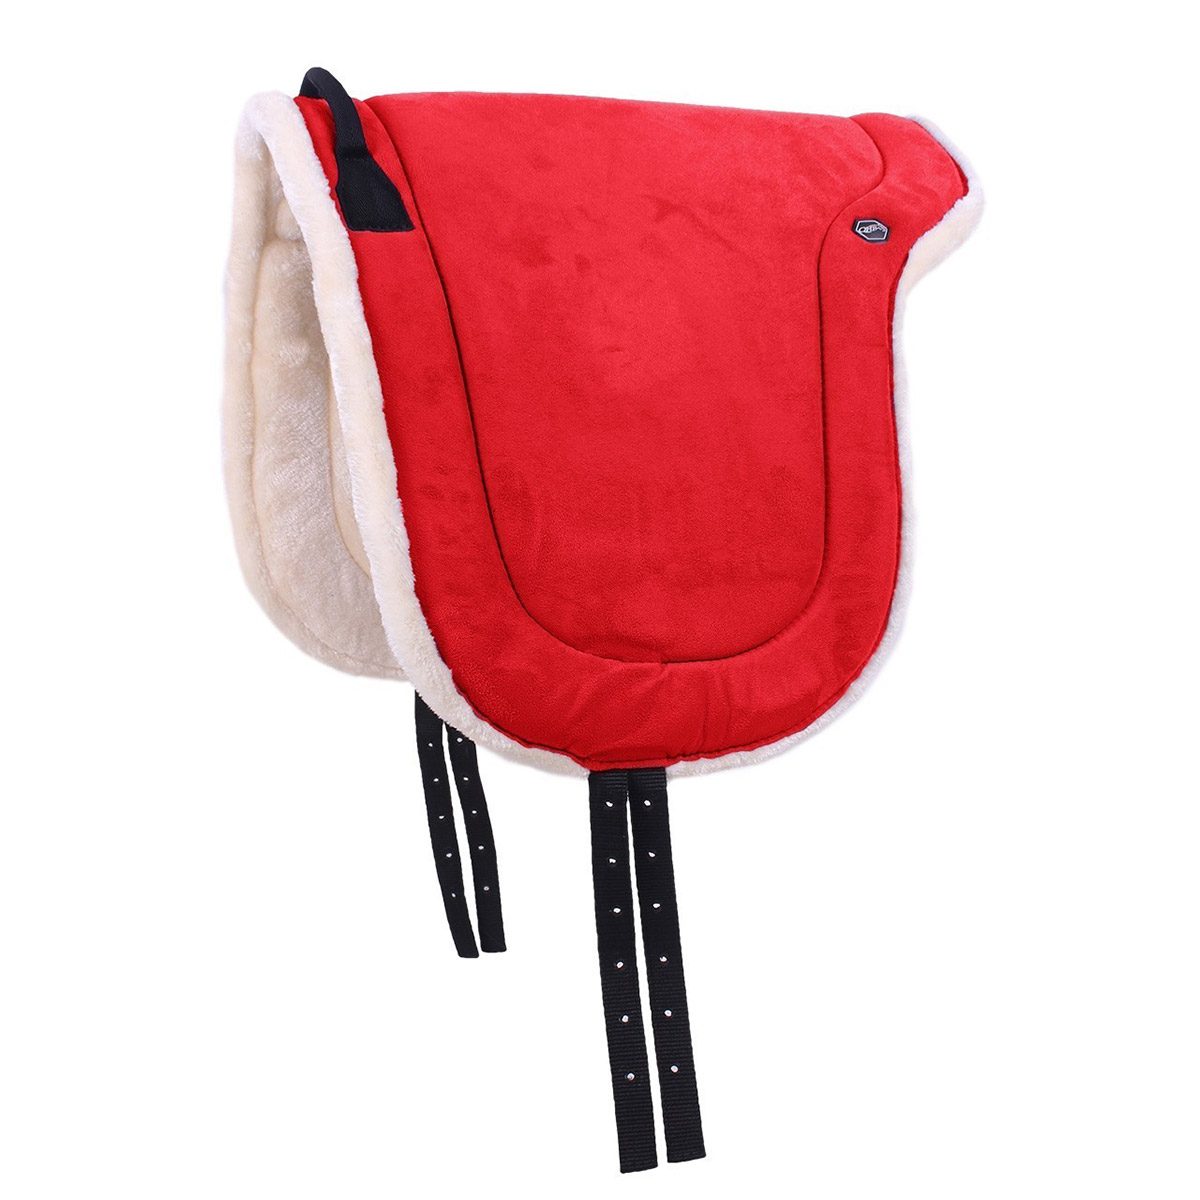 Barebackpad Qhp, Pony in rood